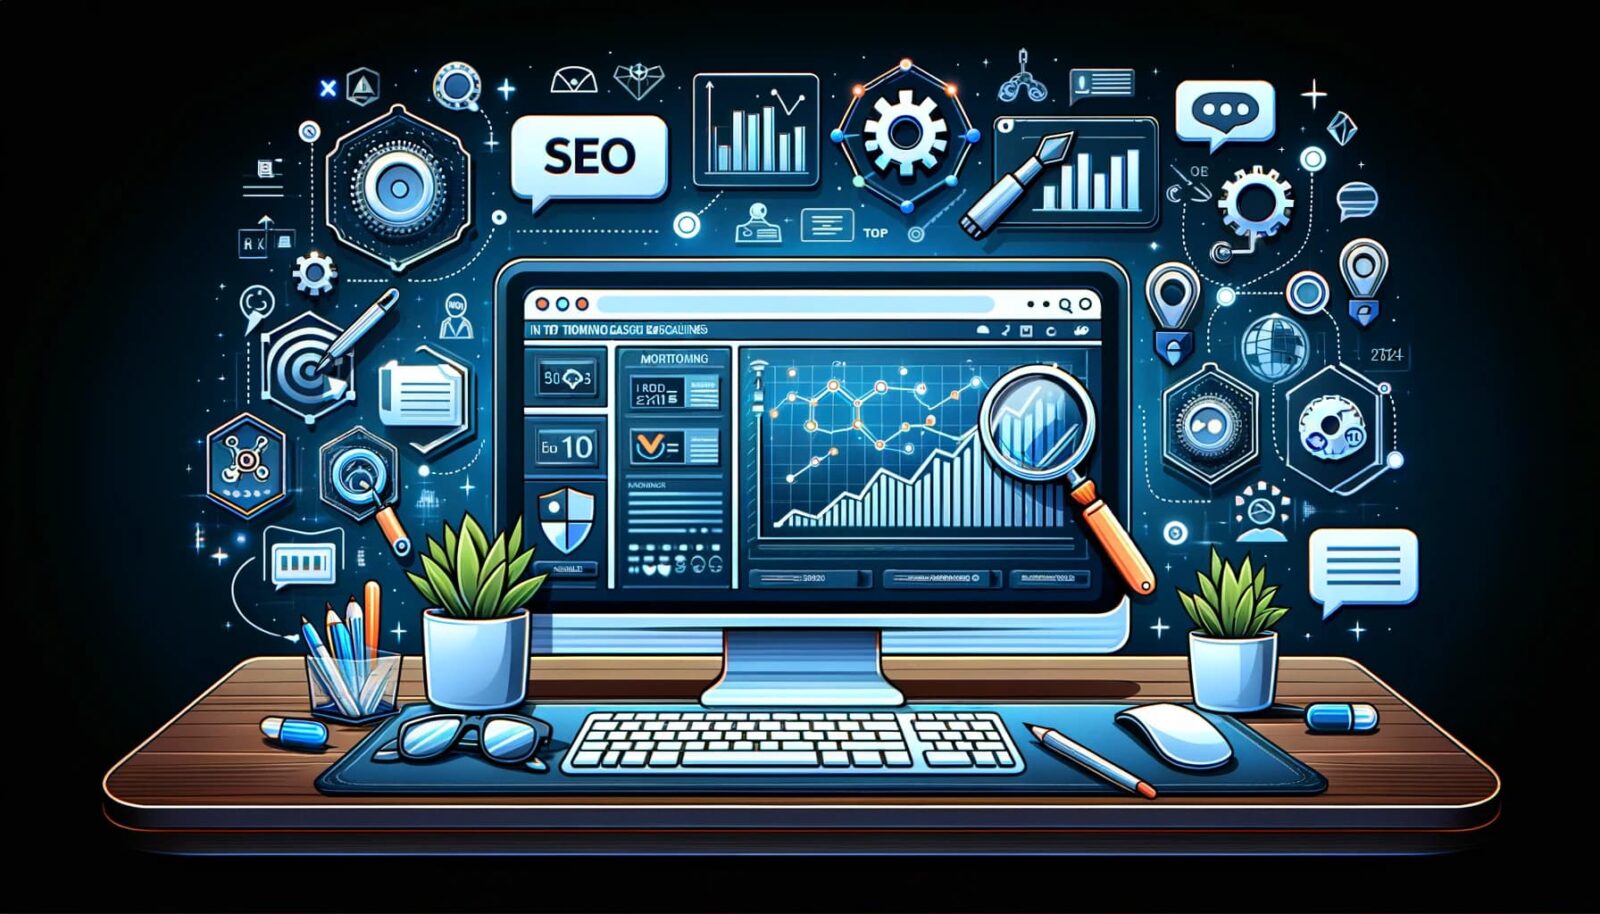 “In SEO, Monitoring Backlinks is Crucial_ Top 10 Tools to Strategically Monitor Your Backlinks